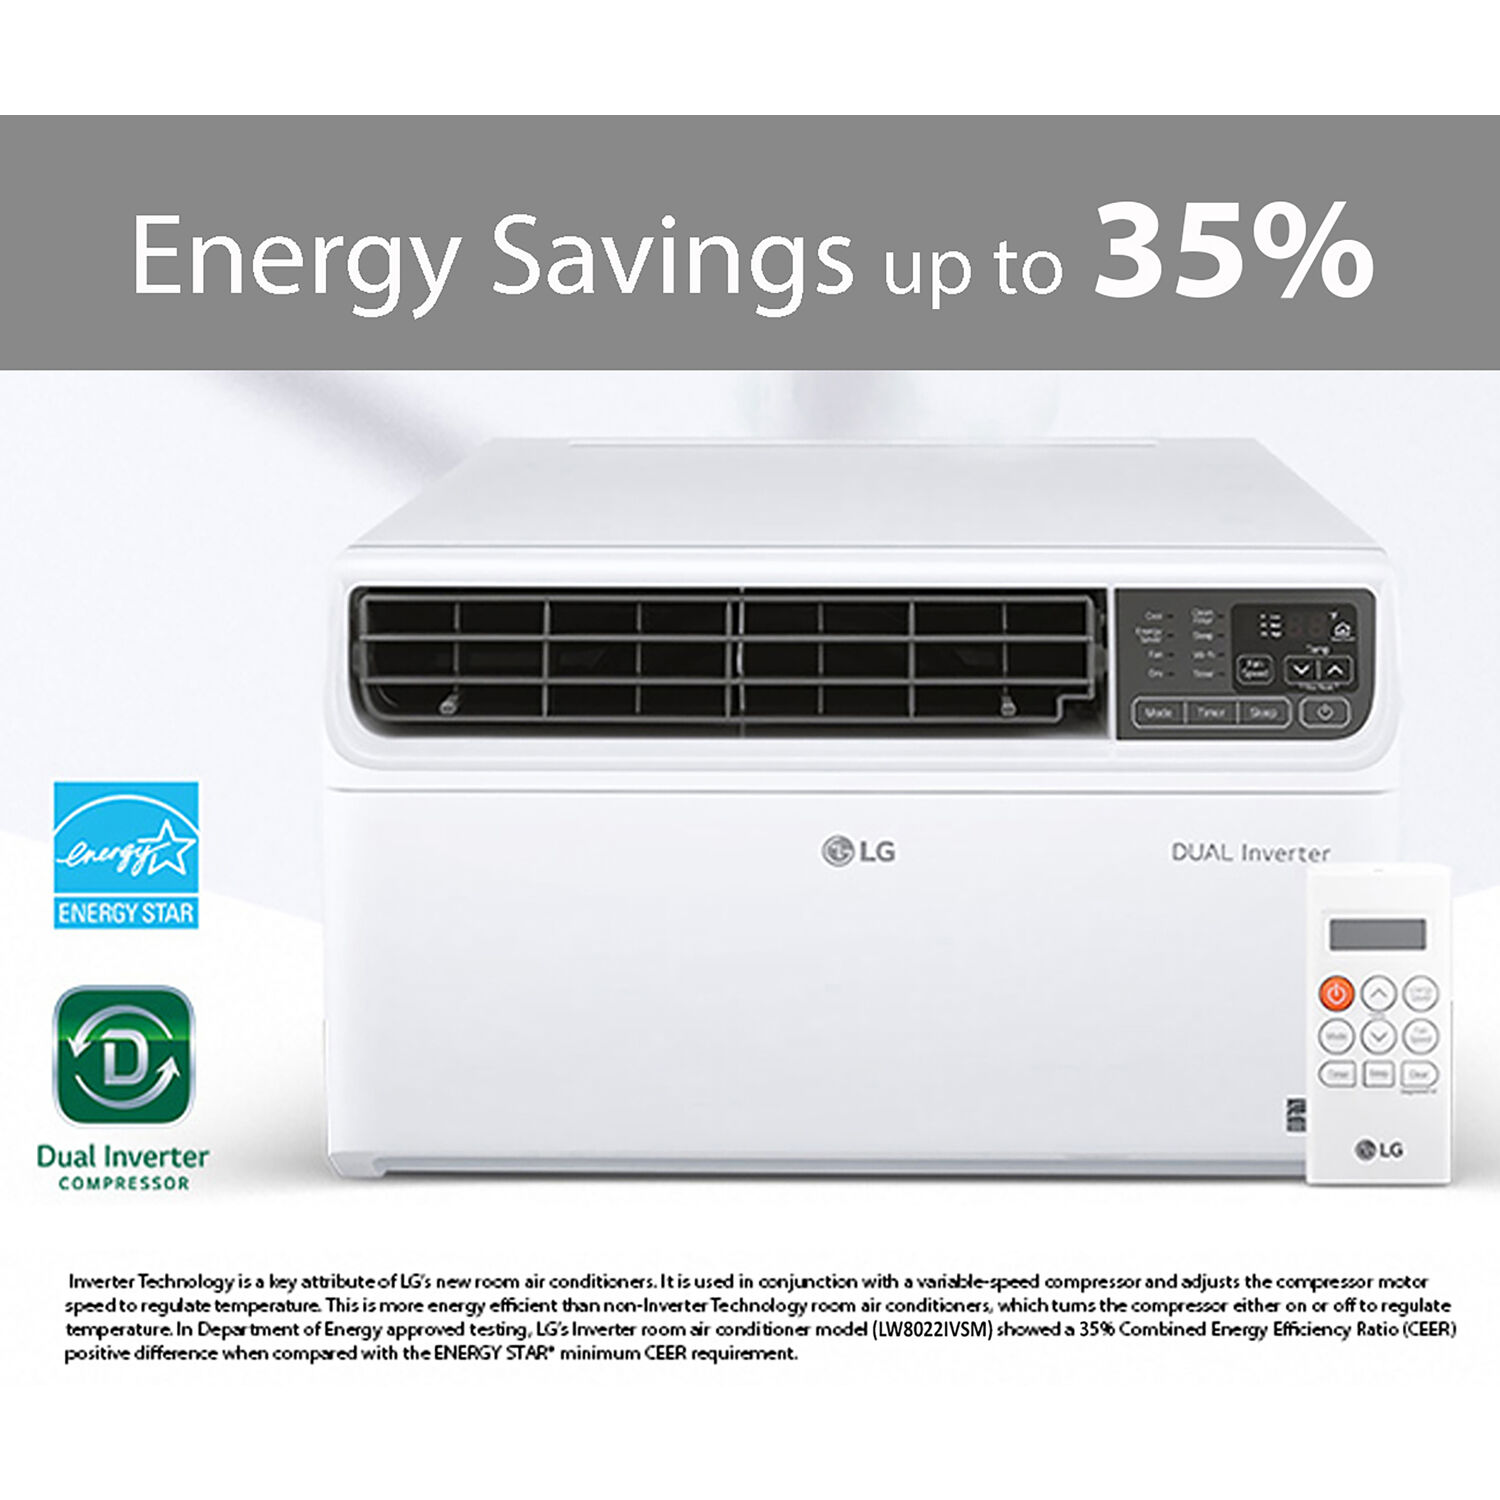 LG 8,000 BTU DUAL Inverter Smart Window Air Conditioner, Cools 340 sq ft, Works with Amazon Alexa - image 5 of 9